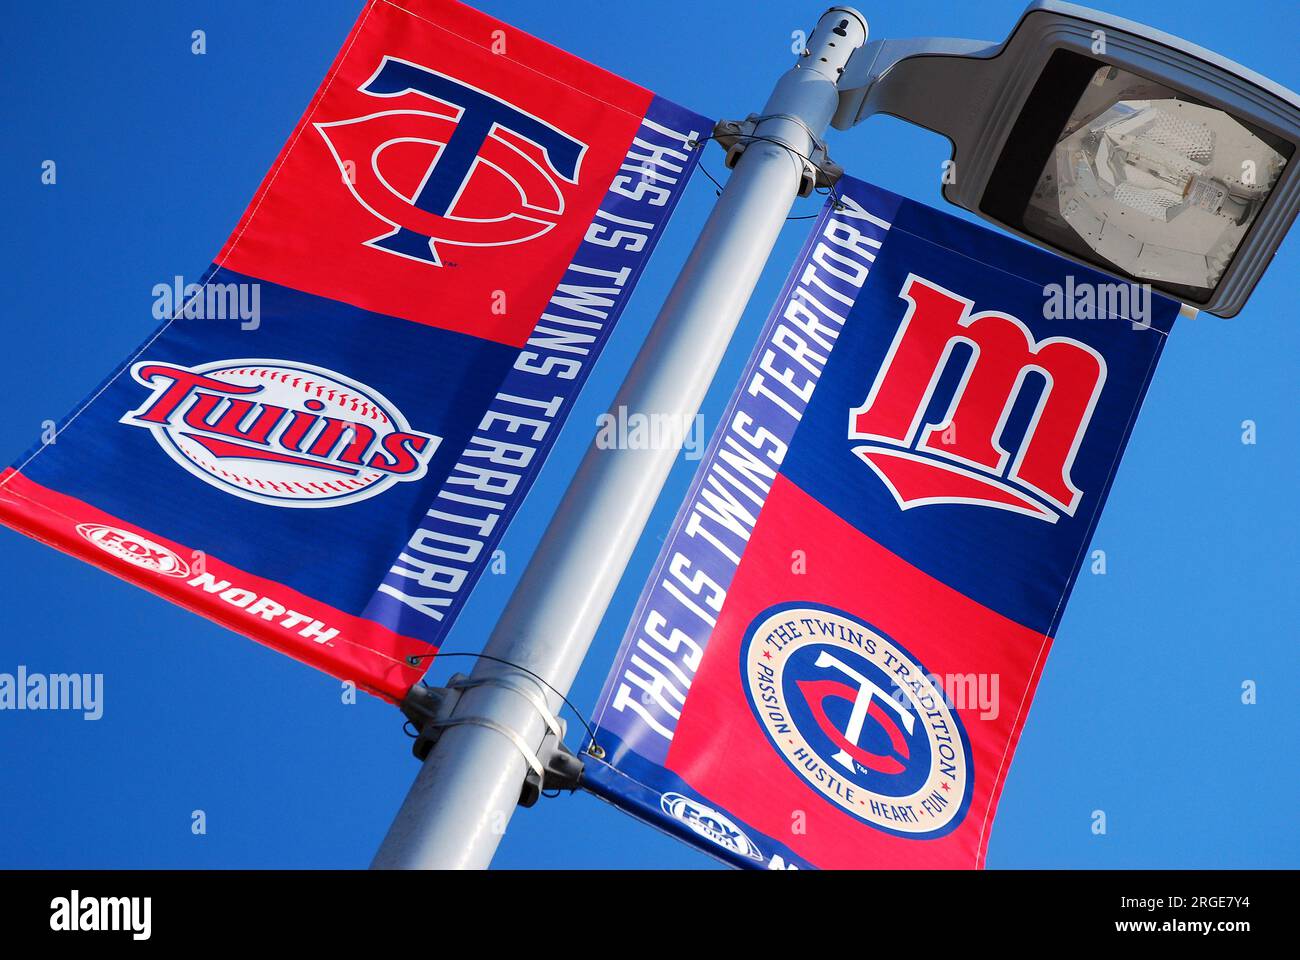 A banner outside Target Field reminds fans of their favorite team and shows the history o the Minnesota Twins team logos Stock Photo